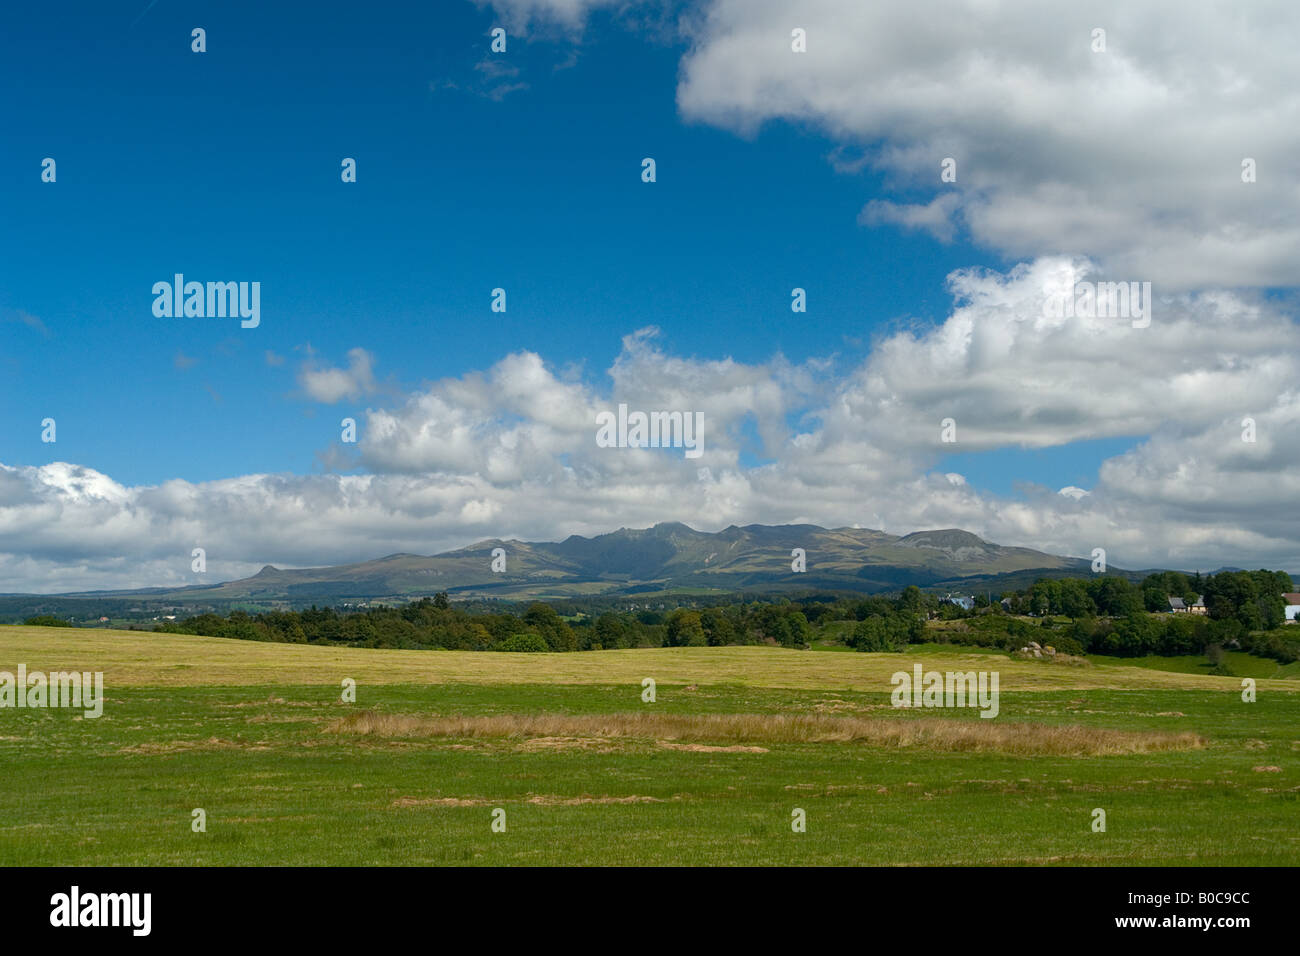 The Monts dore in the Auvergne France Stock Photo